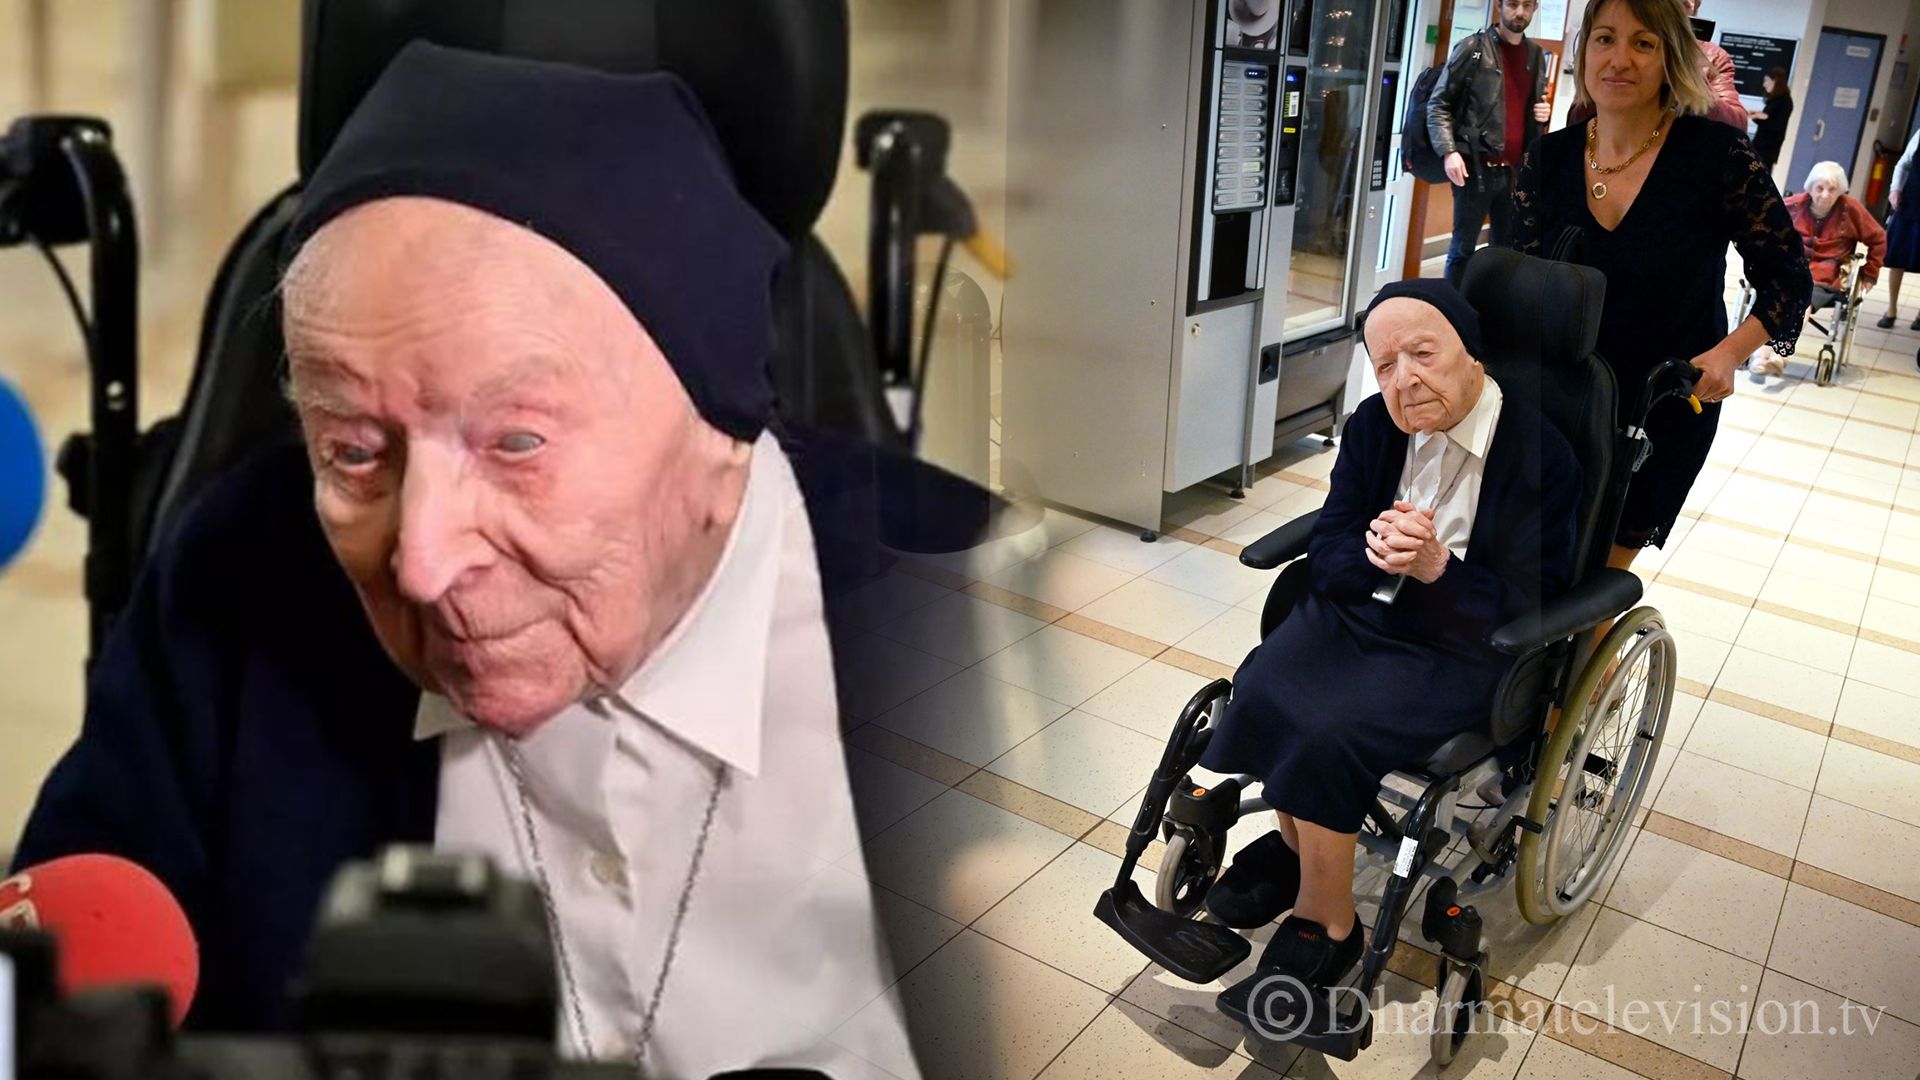 Europe's oldest person aged 117 wins Corona